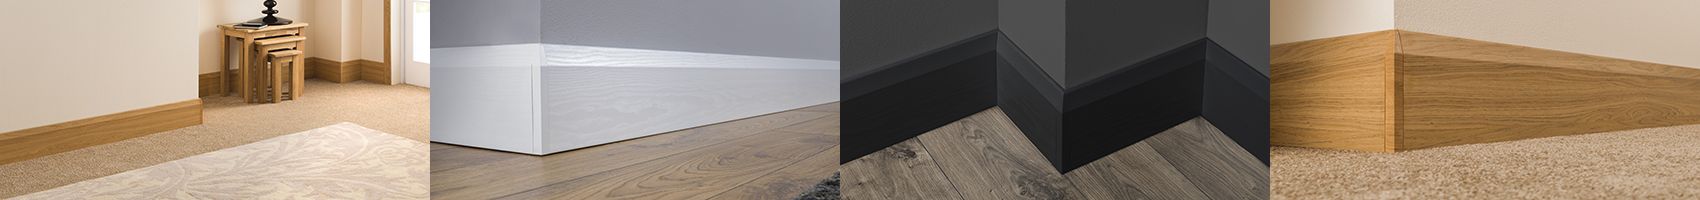 150mm Anthracite Ogee Roomline Skirting Board 5m